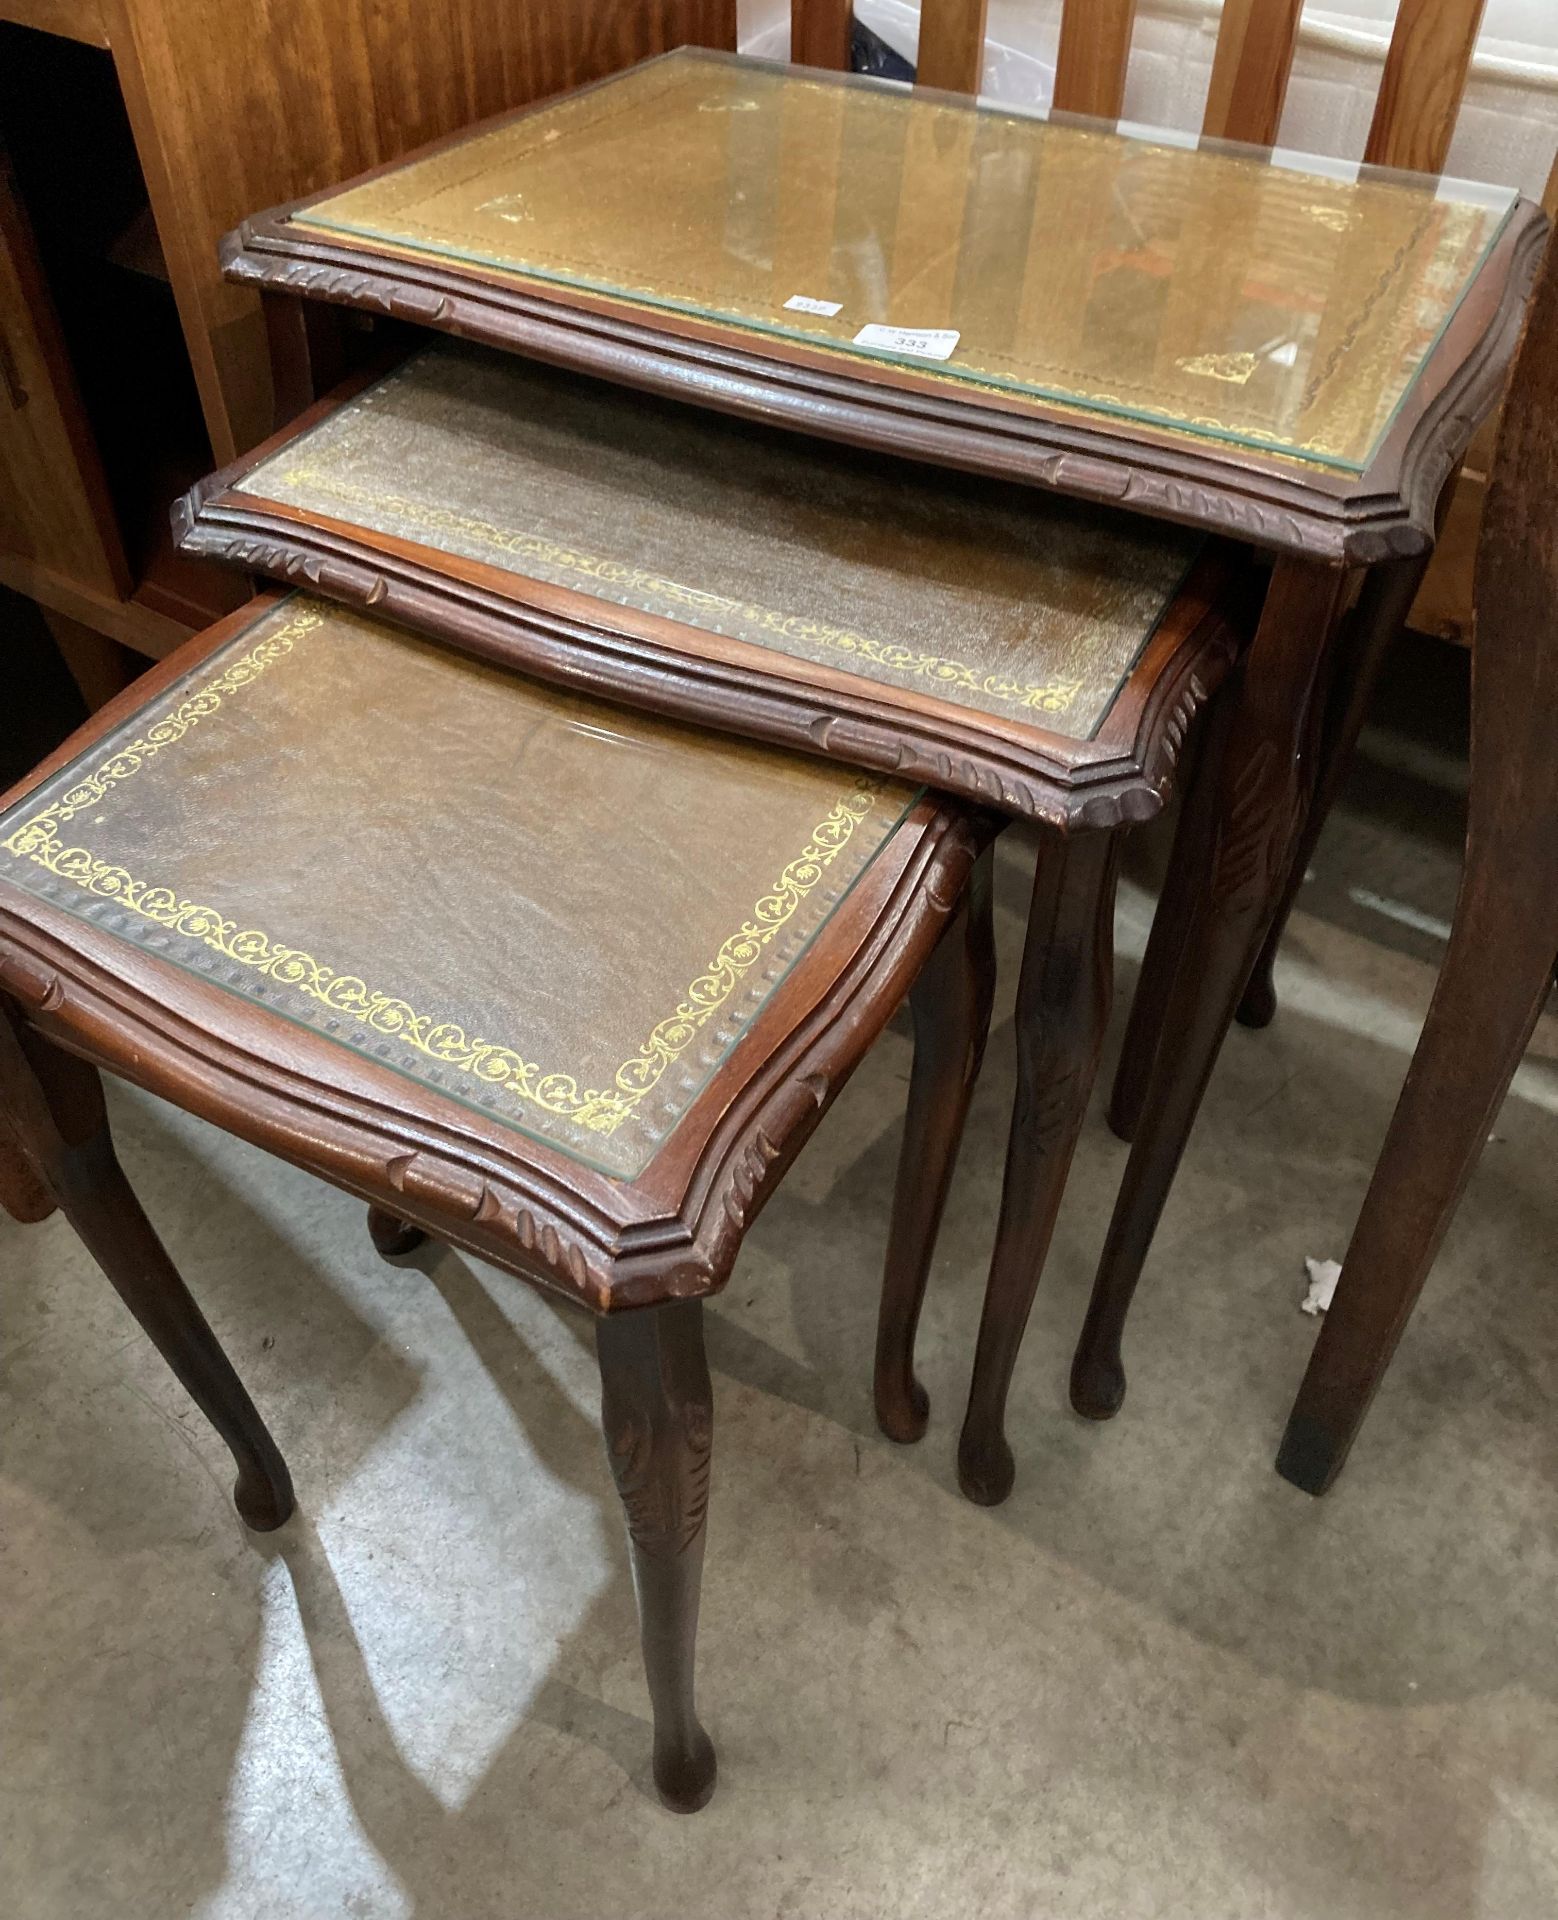 A mahogany finish nest of three coffee tables with brown tooled leather finish tops and glass - Image 2 of 2